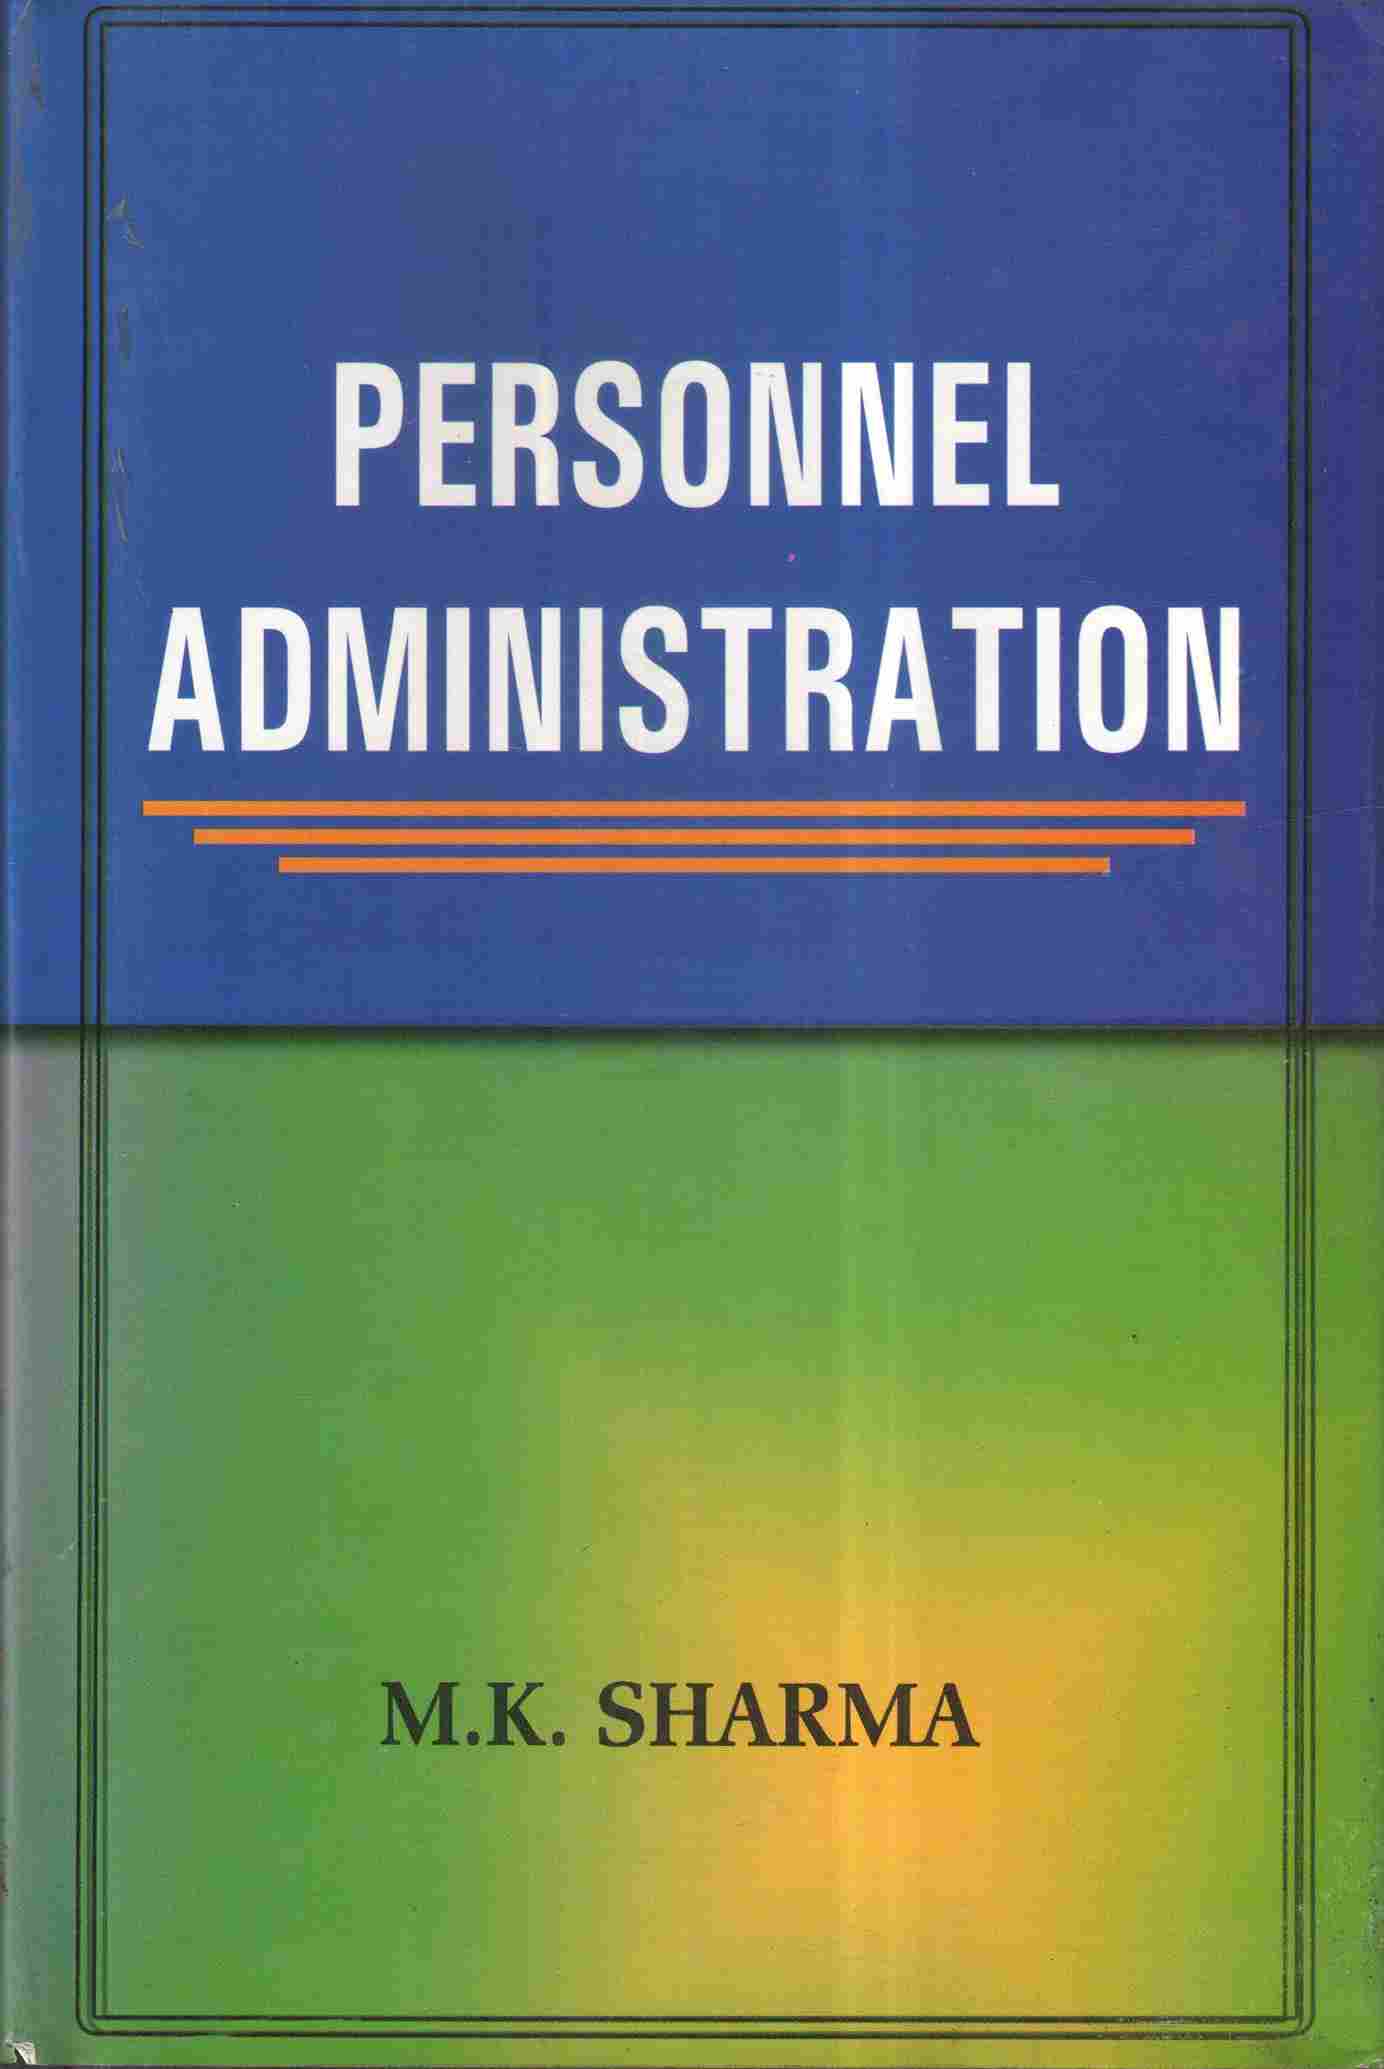 �Personnel-Administration